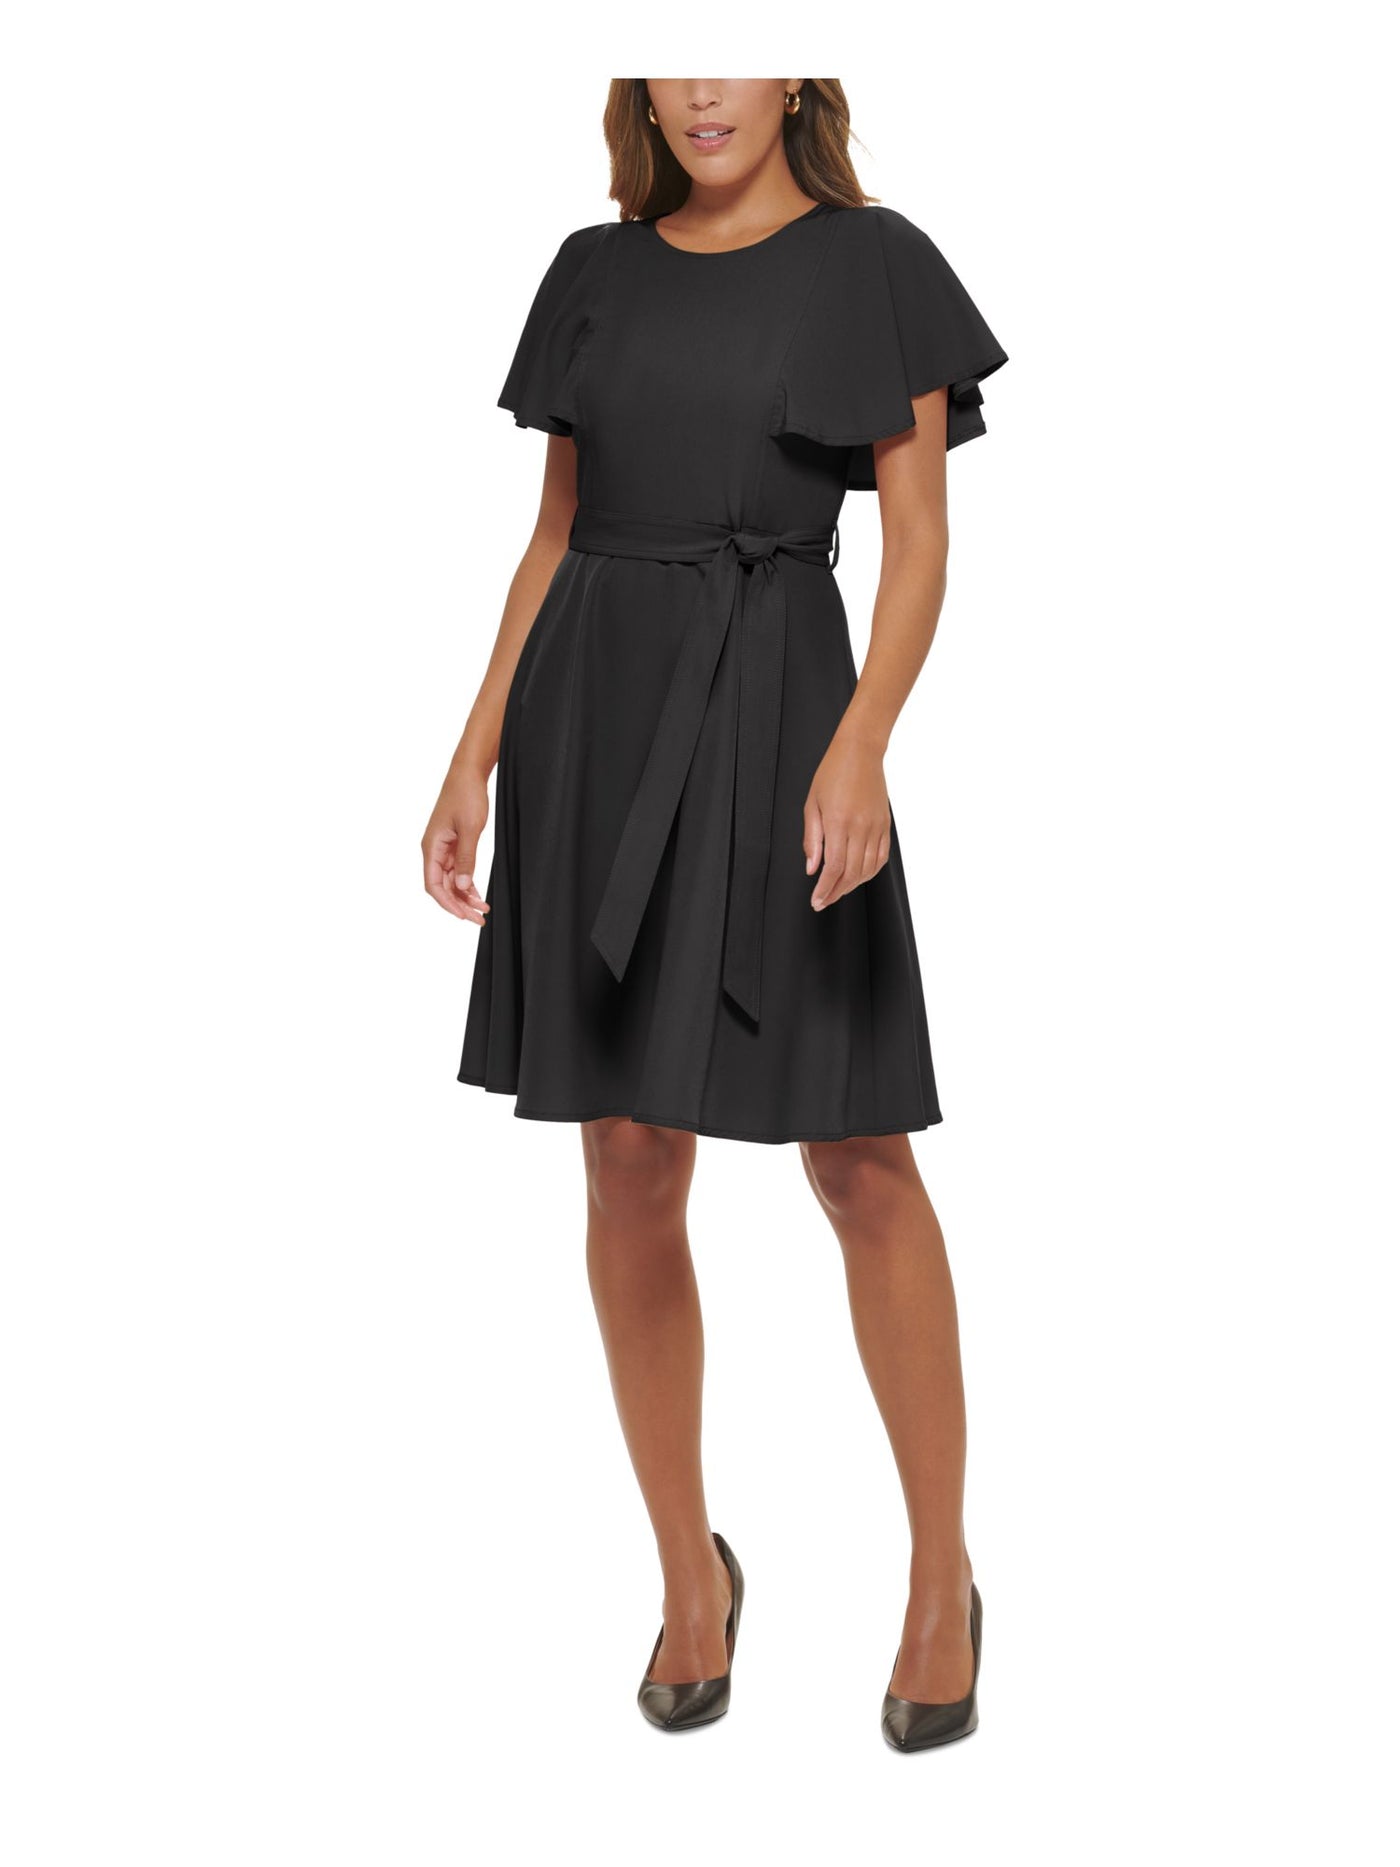 CALVIN KLEIN Womens Black Zippered Pocketed Tie Waist Unlined Flutter Sleeve Boat Neck Knee Length Party Fit + Flare Dress 10